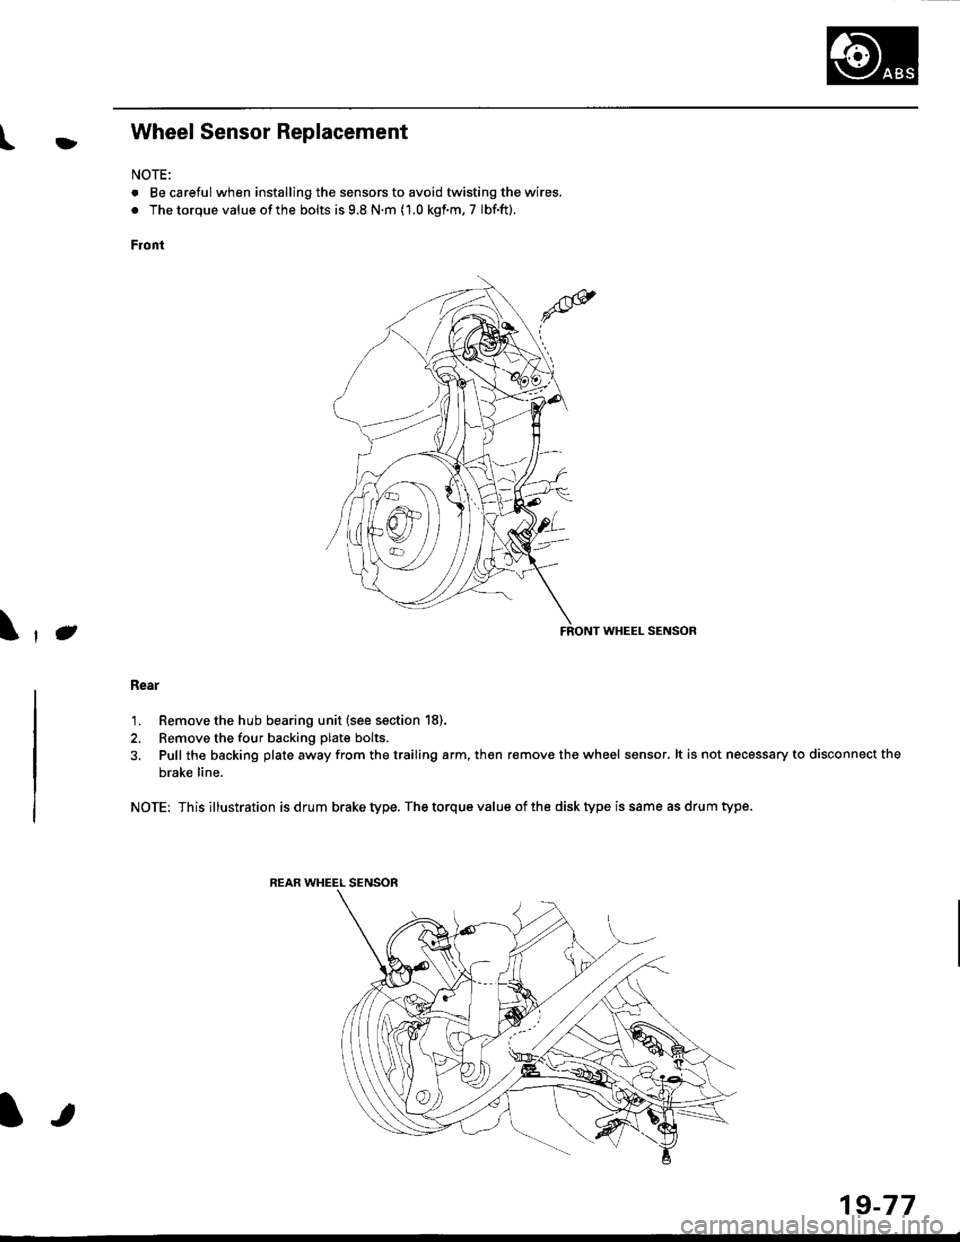 HONDA CIVIC 2000 6.G Owners Guide l}tWheel Sensor Replacement
NOTE:
. Becareful when installingthe sensors to avoid twisting the wires.
. The torque value of the bolts is 9.8 N.m (1.0 kgf.m, 7 lbf.ft).
Front
FRONT WHEEL SENSOR
Rear
1.